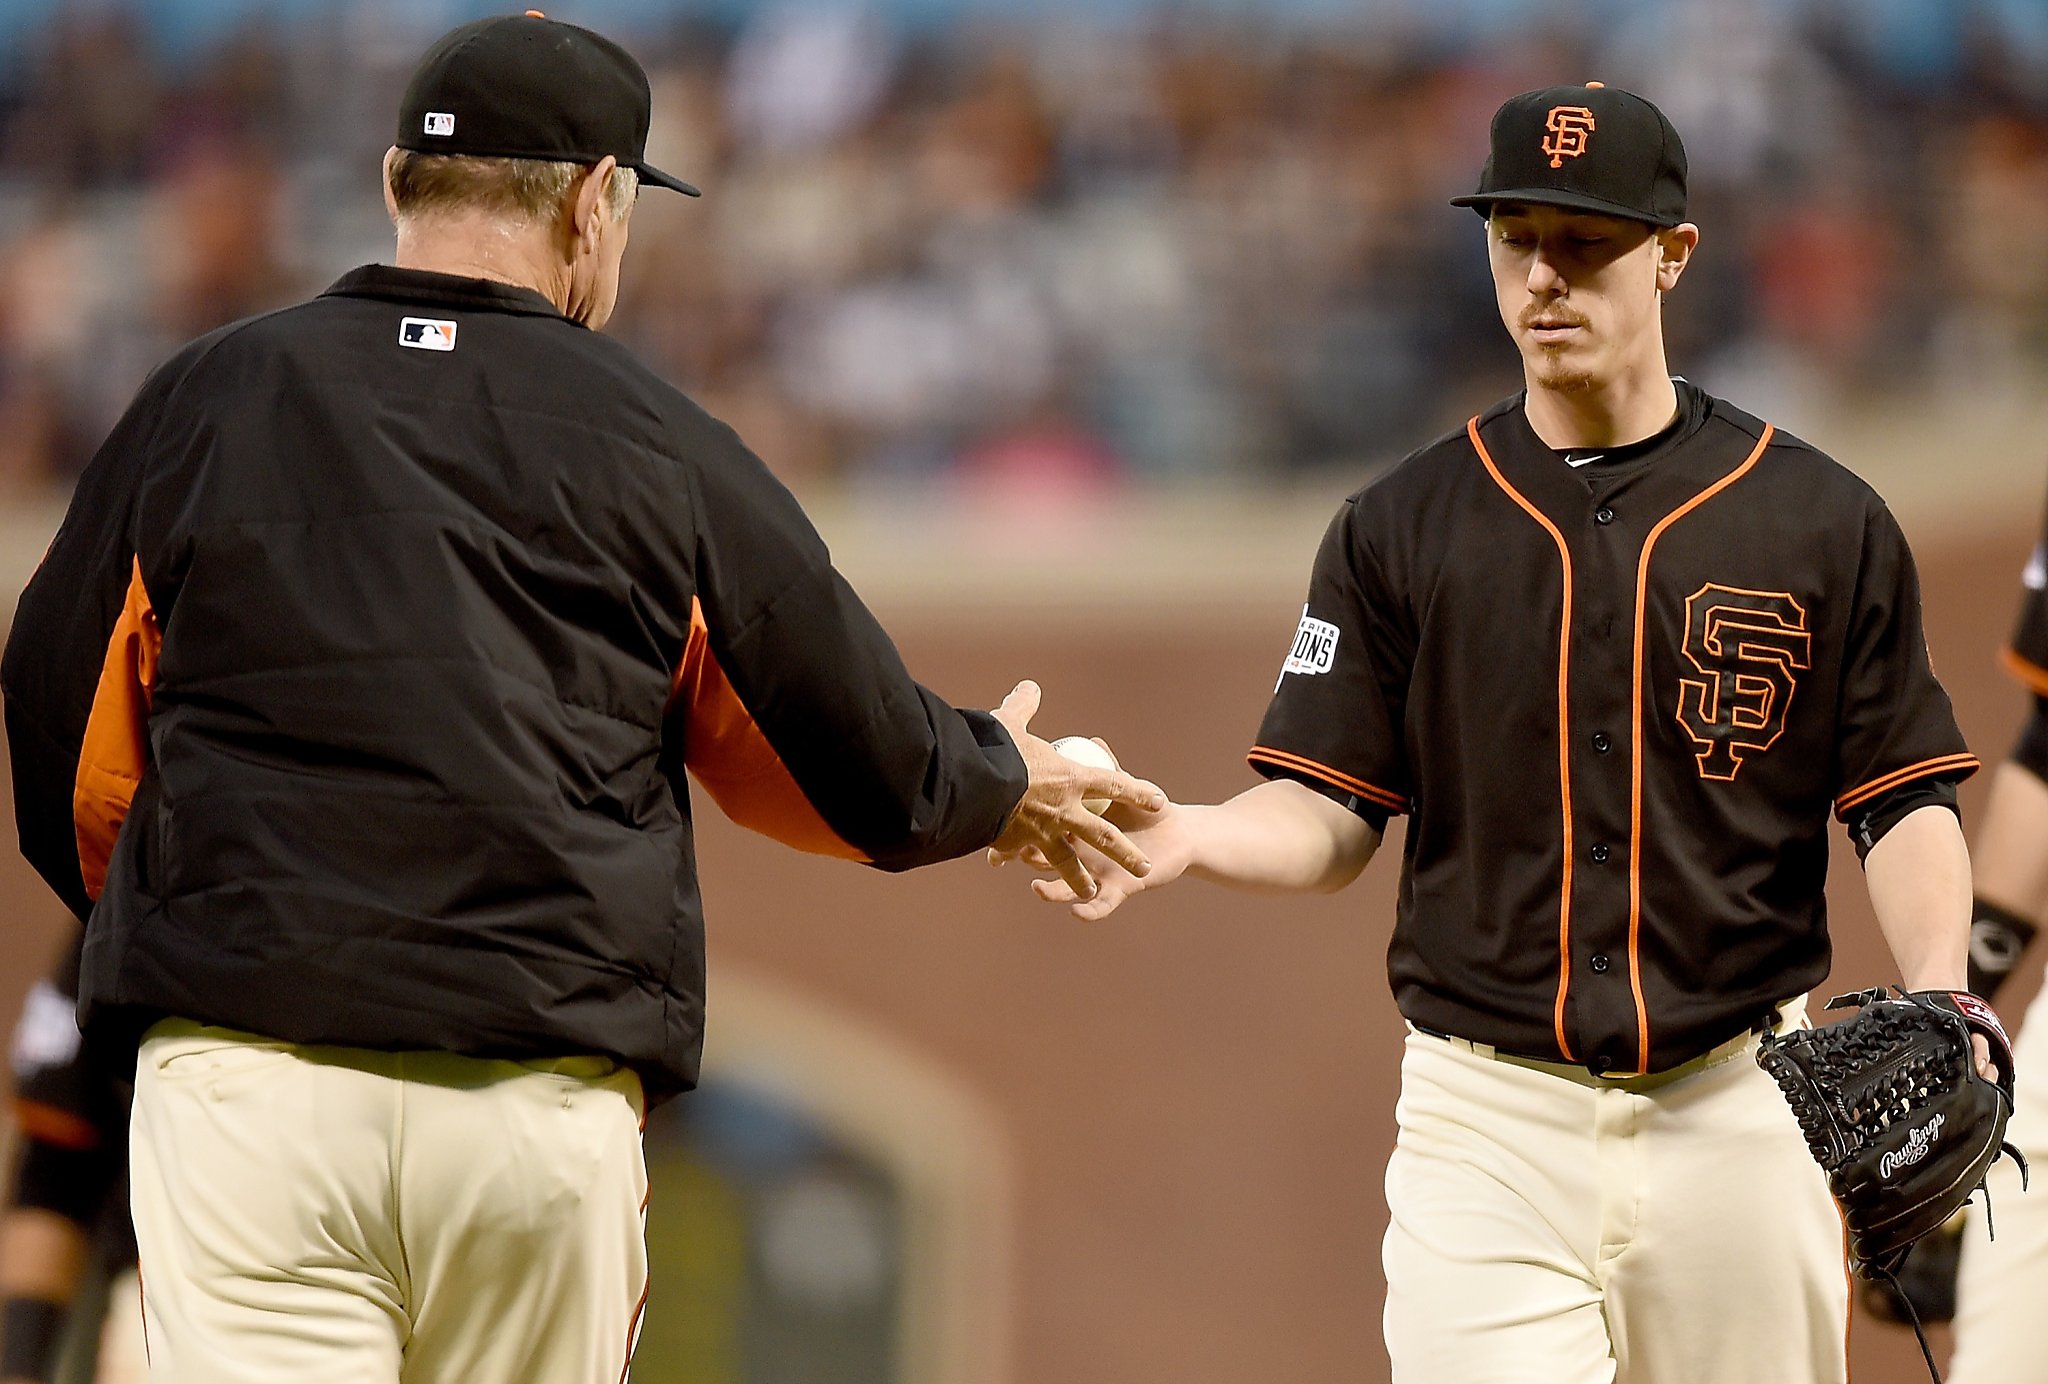 Lincecum and Crawford: Too Attractive to Live